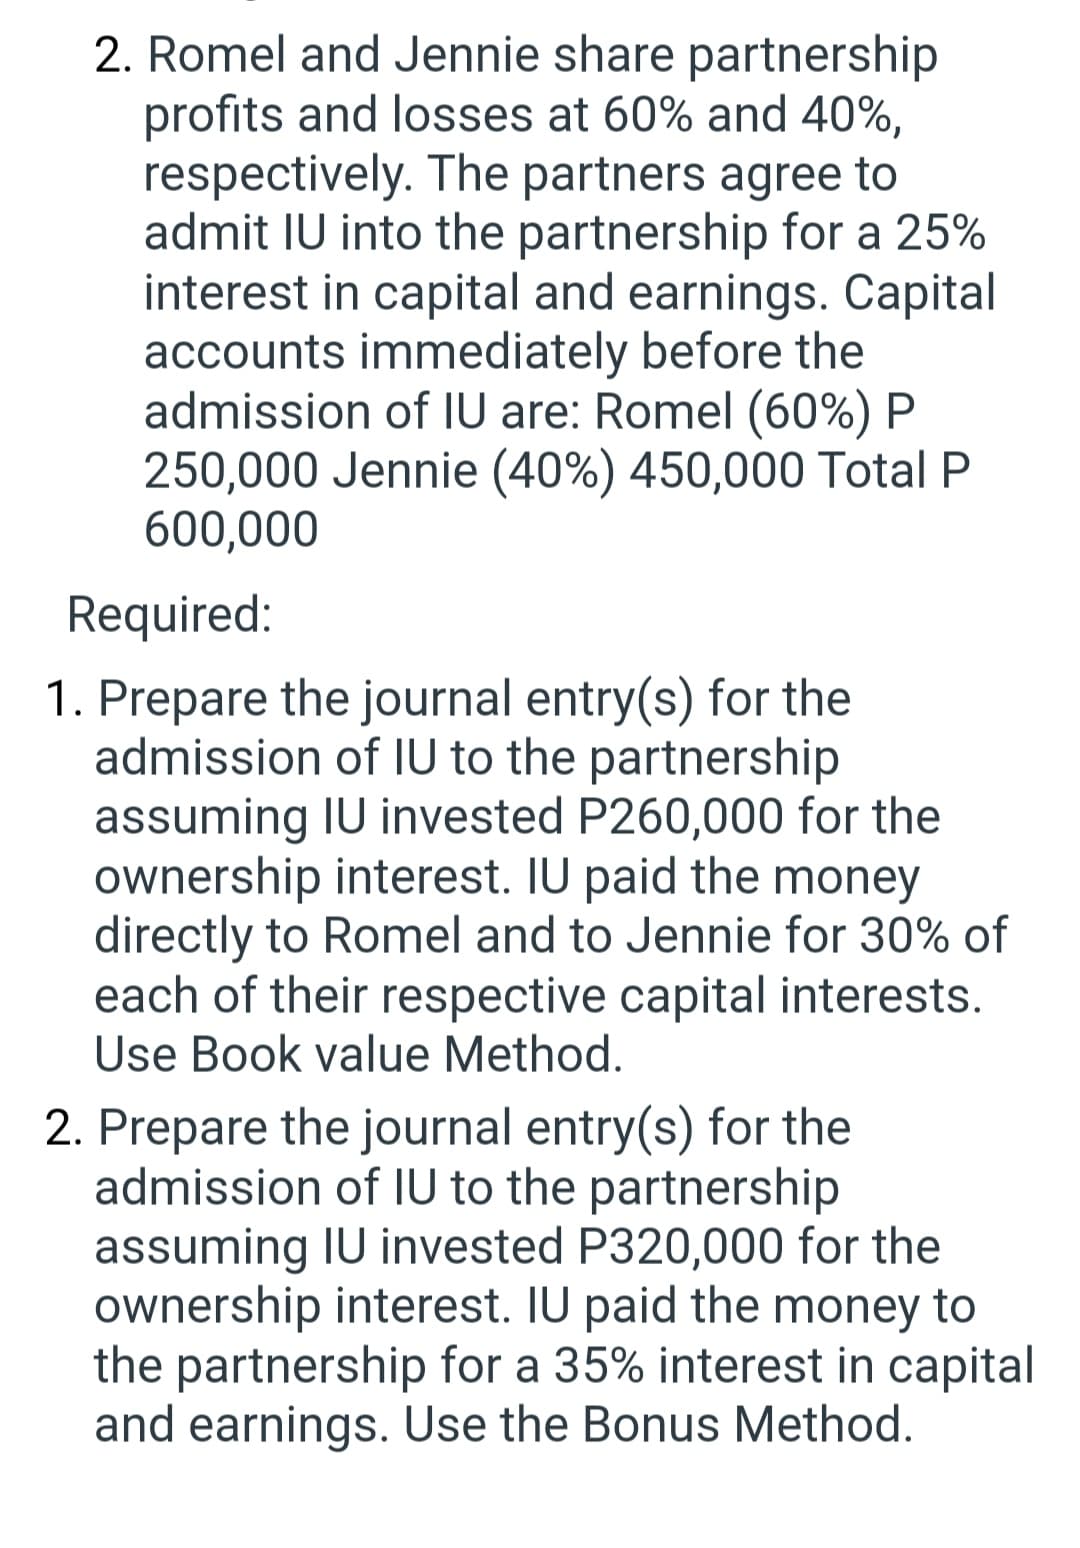 2. Romel and Jennie share partnership
profits and losses at 60% and 40%,
respectively. The partners agree to
admit IU into the partnership for a 25%
interest in capital and earnings. Capital
accounts immediately before the
admission of IU are: Romel (60%) P
250,000 Jennie (40%) 450,000 Total P
600,000
Required:
1. Prepare the journal entry(s) for the
admission of IU to the partnership
assuming IU invested P260,000 for the
ownership interest. IU paid the money
directly to Romel and to Jennie for 30% of
each of their respective capital interests.
Use Book value Method.
2. Prepare the journal entry(s) for the
admission of IU to the partnership
assuming IU invested P320,000 for the
ownership interest. IU paid the money to
the partnership for a 35% interest in capital
and earnings. Use the Bonus Method.
